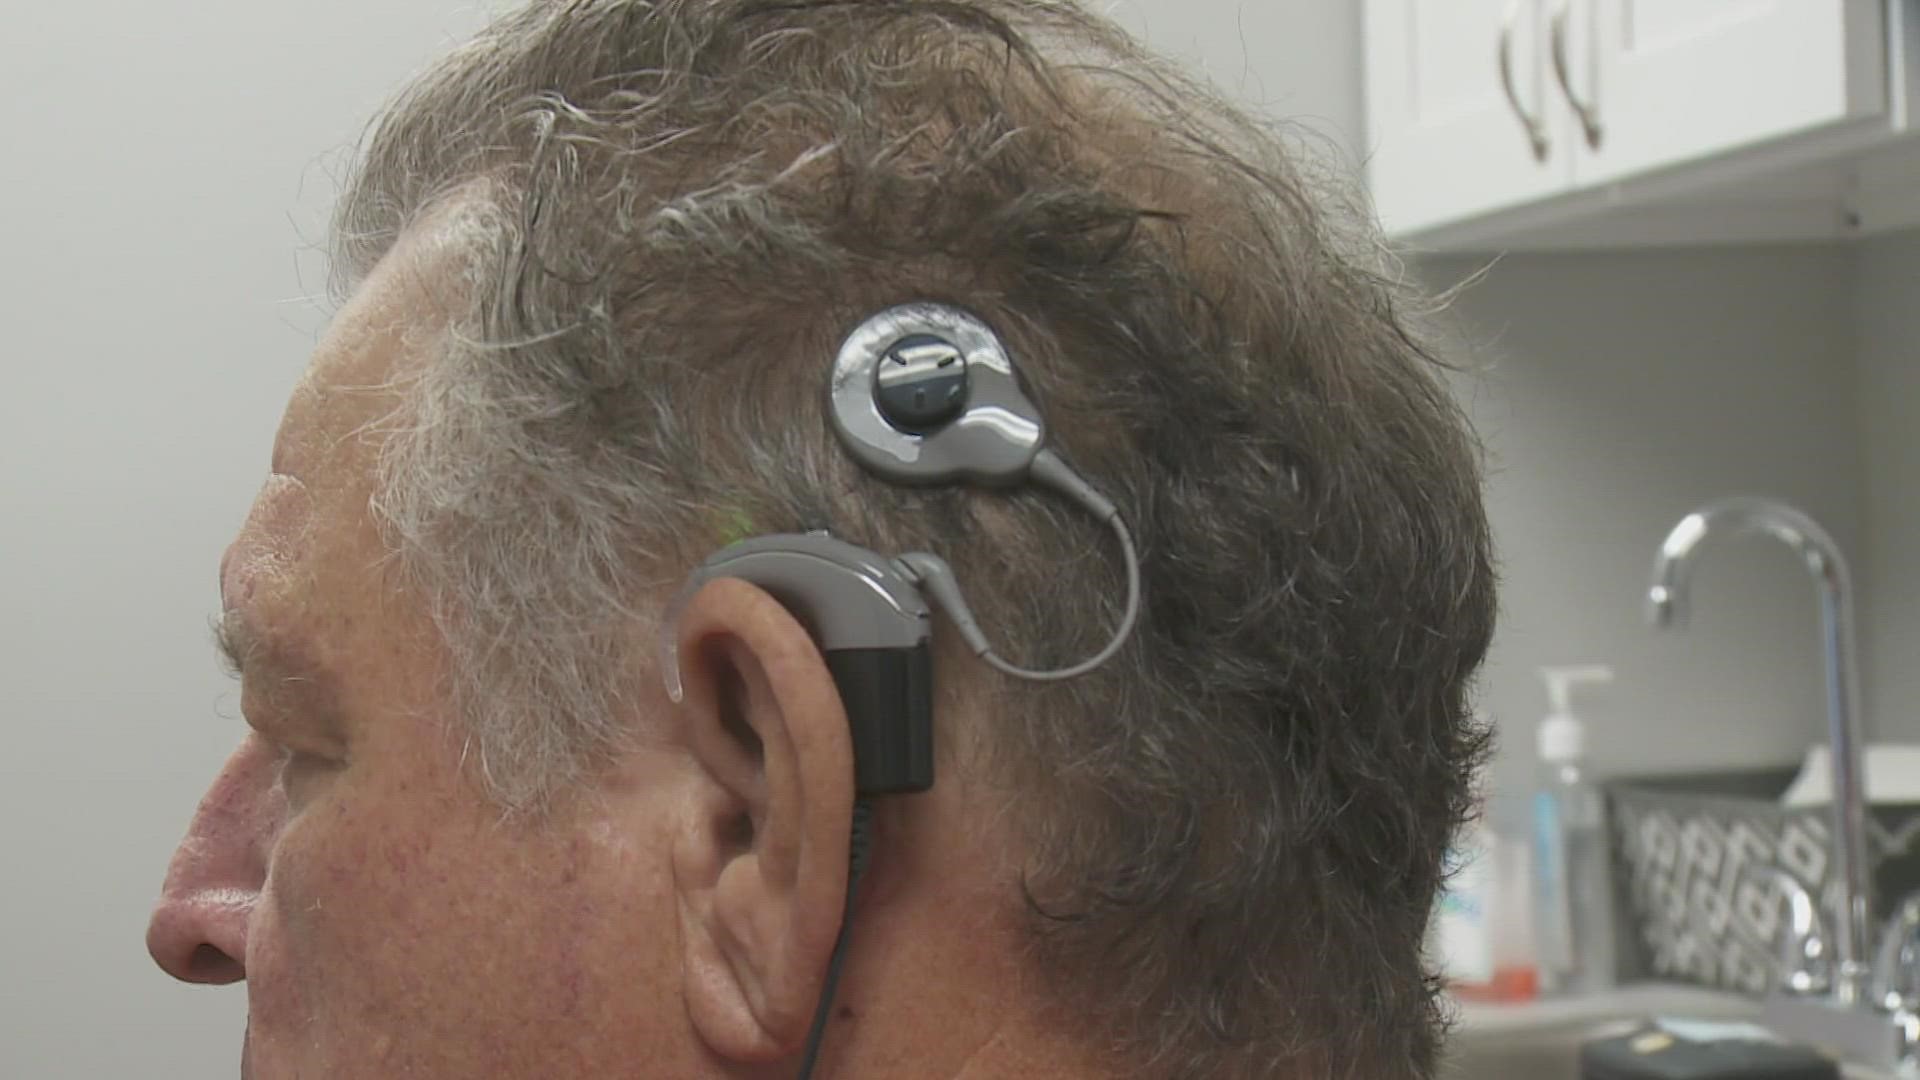 A 63-year-old former Ole Miss Football player got the gift of sound after a condition stole hearing in his left ear a year ago.